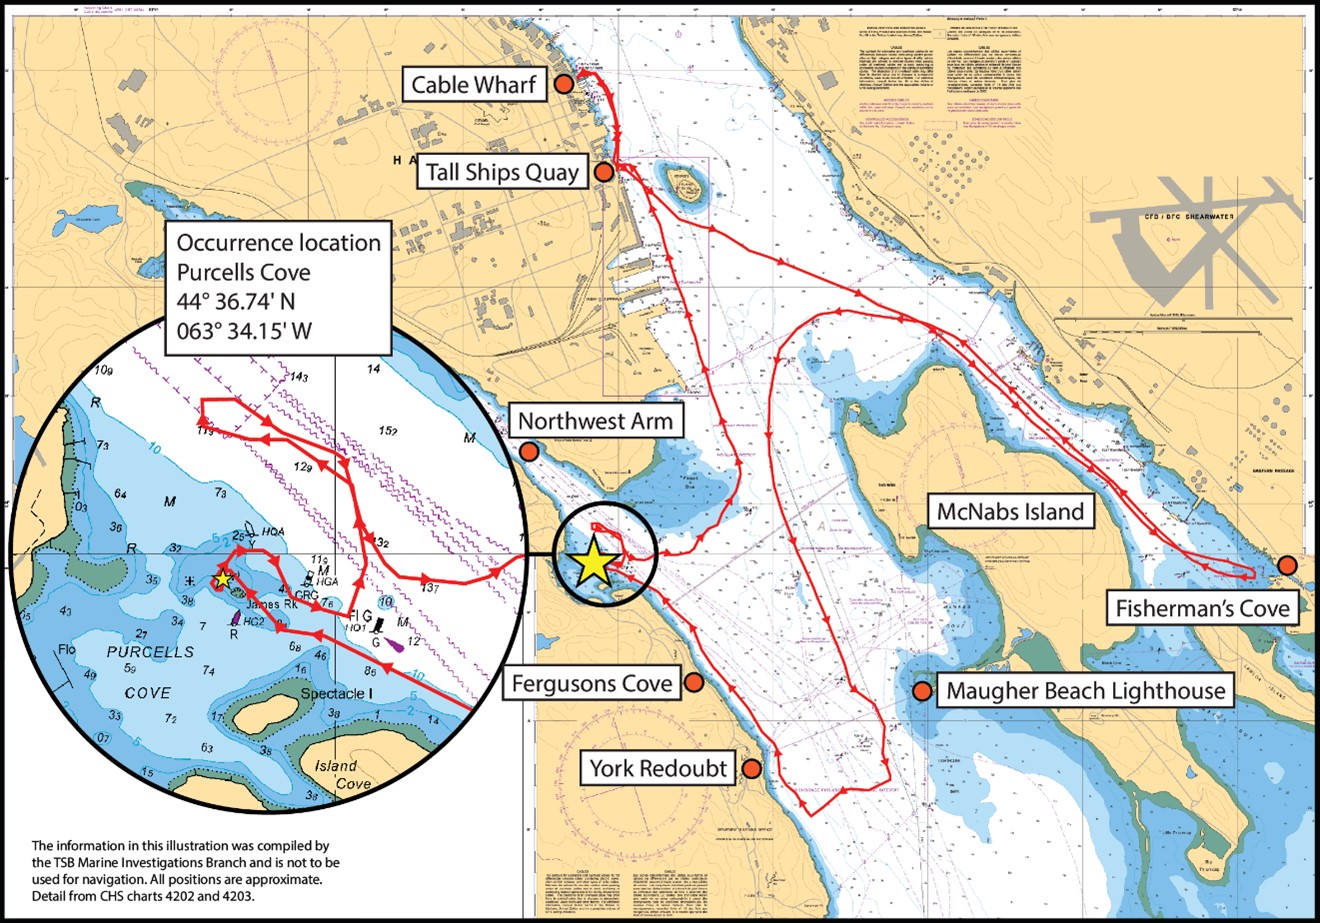 Occurrence location and vessel track (Source: Canadian Hydrographic Service, charts 4202 and 4203, with TSB annotations)